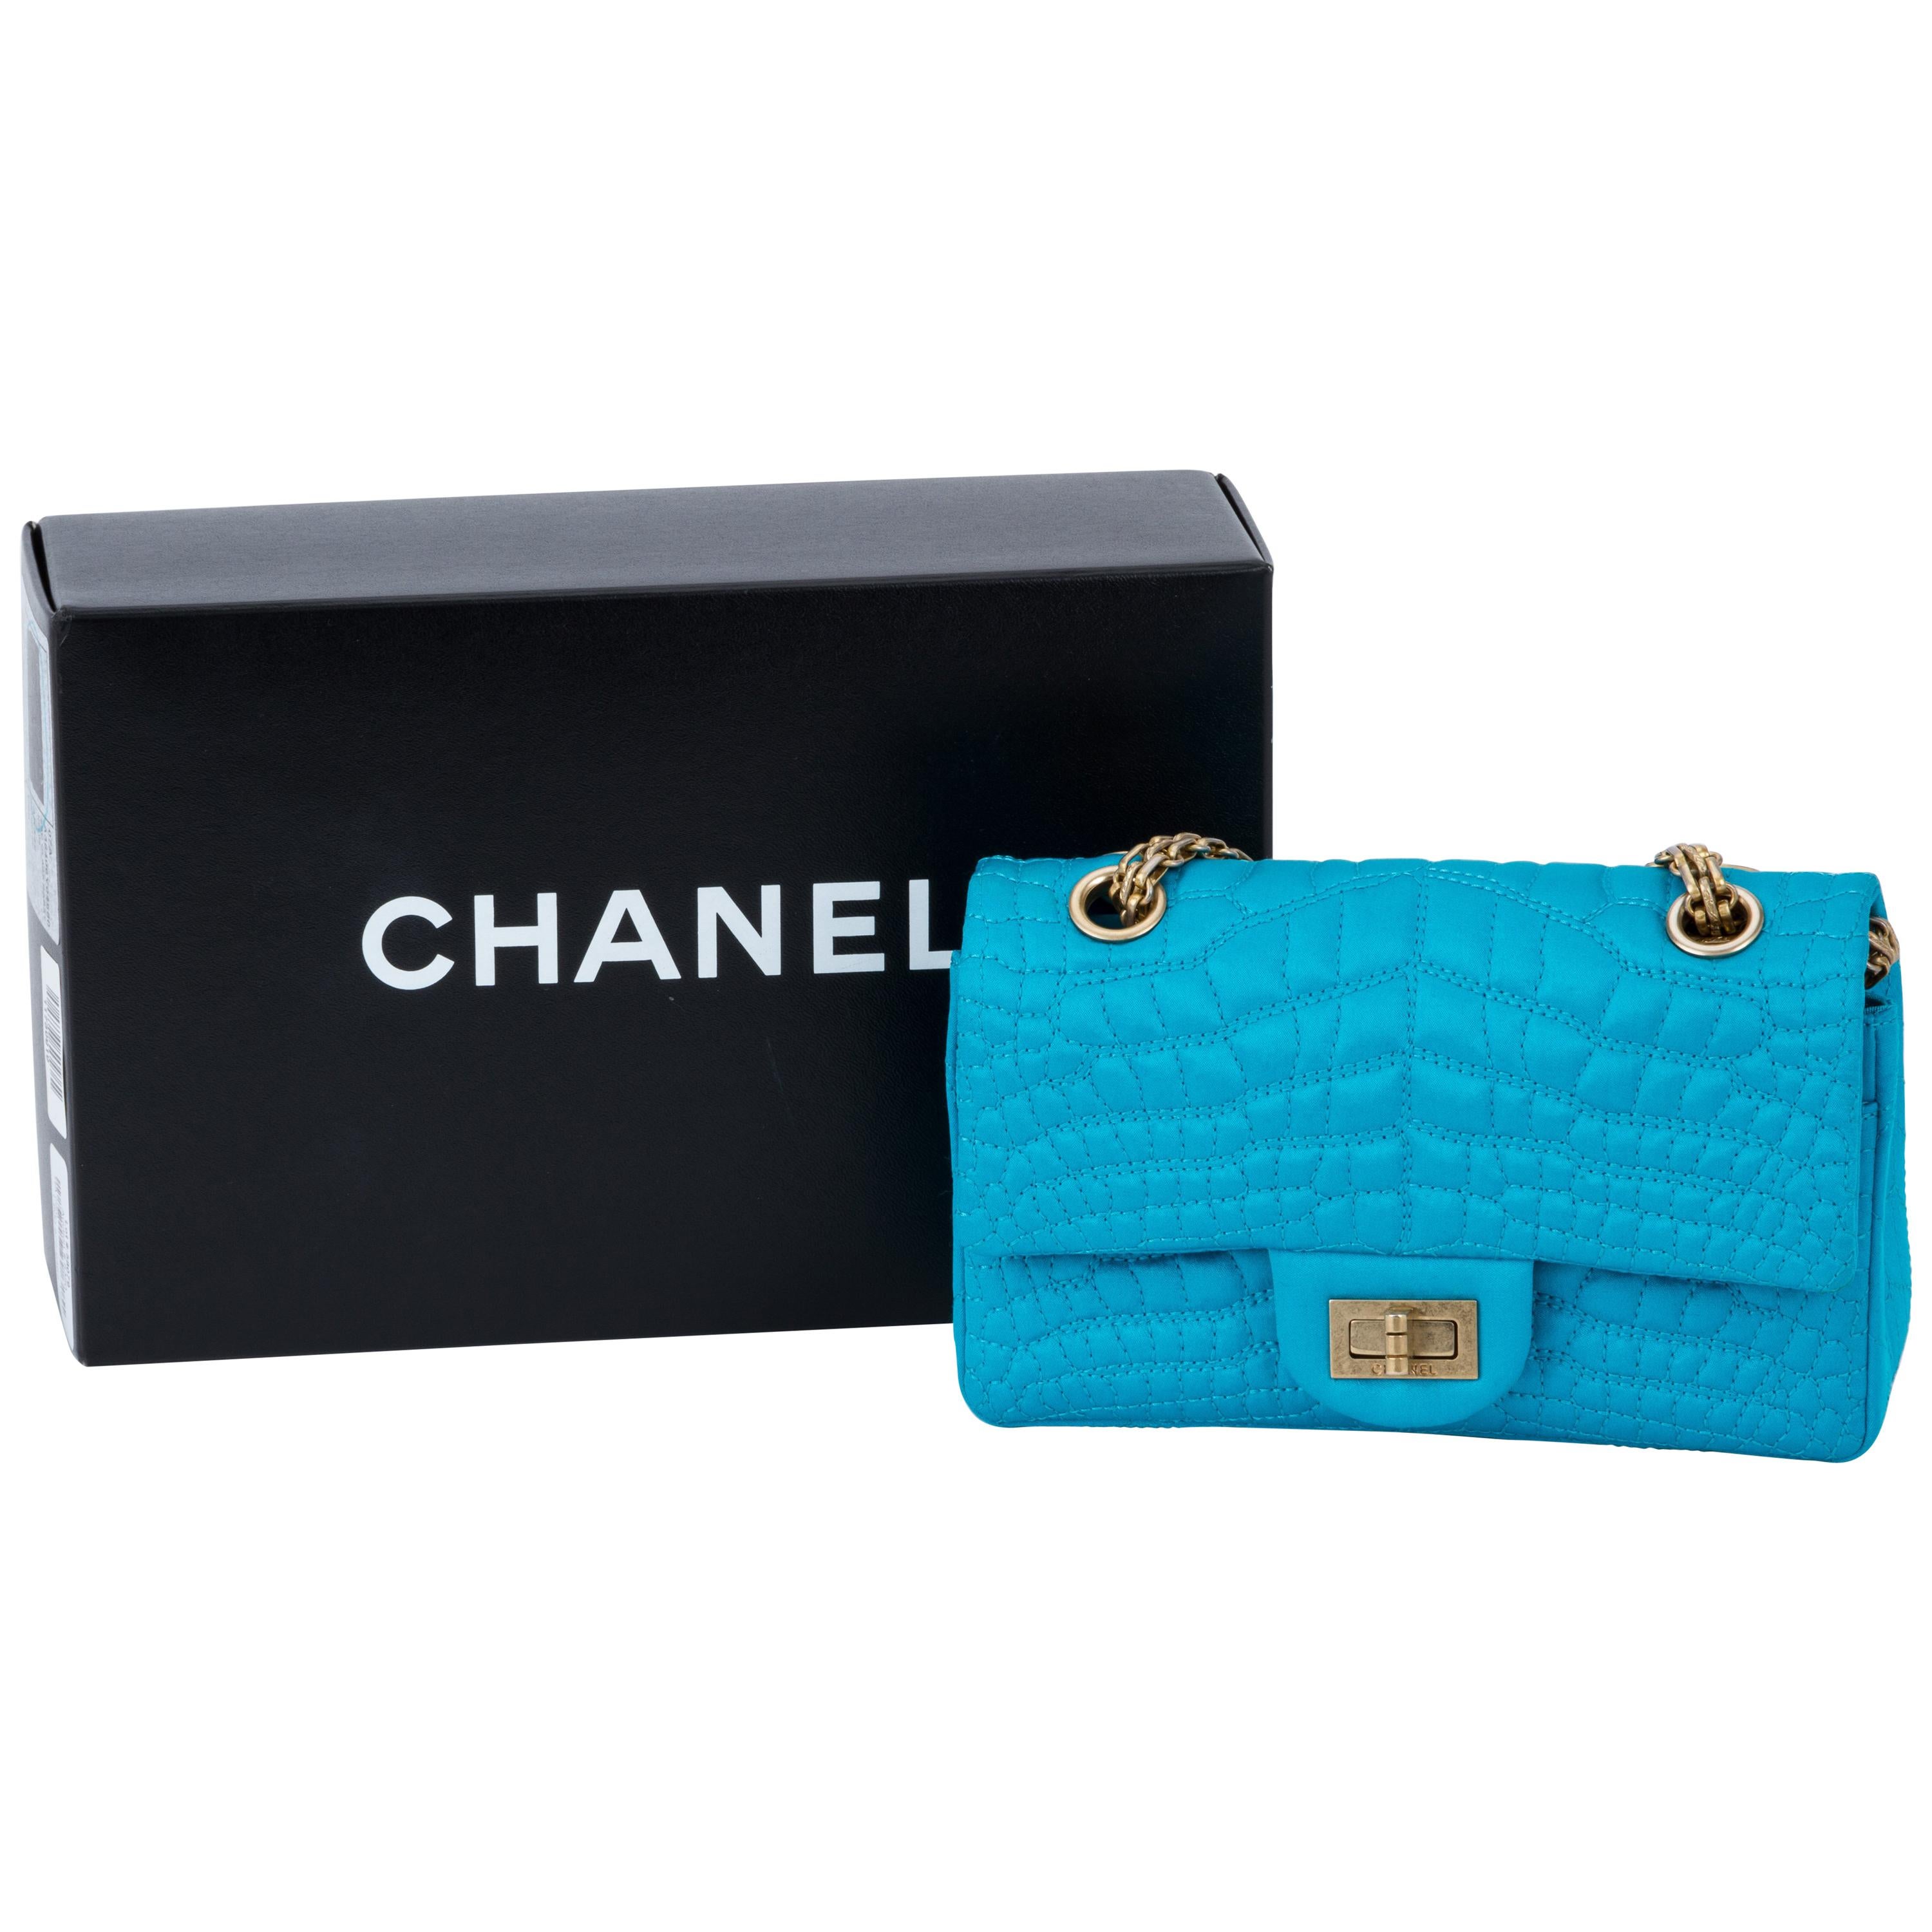 Chanel Silk Croc Embossed Turquoise Flap Bag